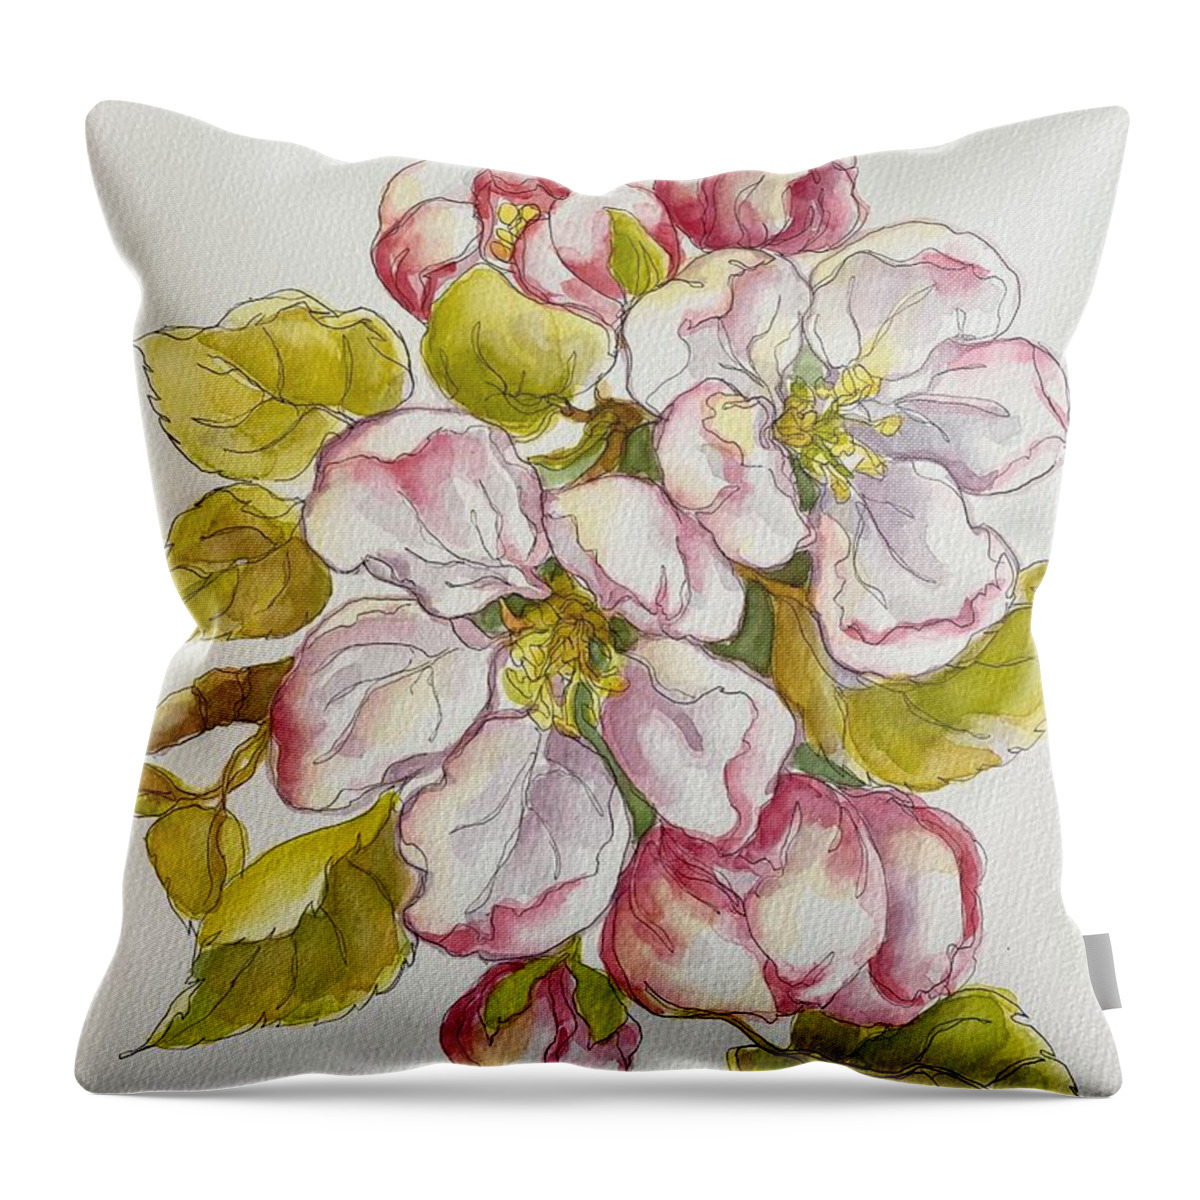 Apple Blossoms Throw Pillow featuring the painting Apple blossoms by Inese Poga